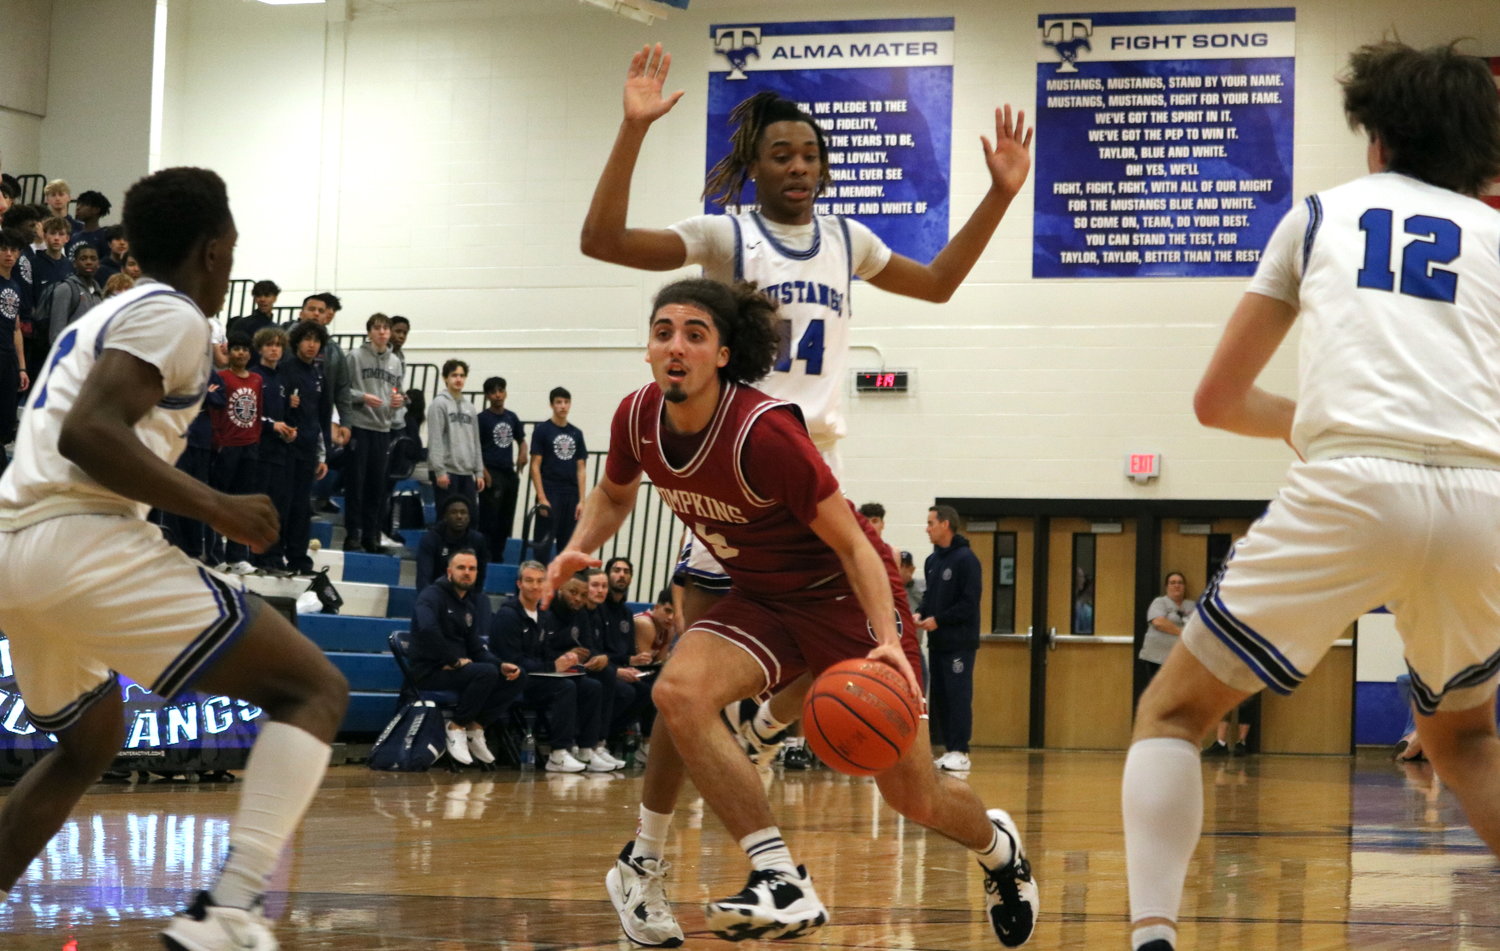 Luke Caughran dribbles through the Taylor defense during Saturday's game between Tompkins and Taylor at the Taylor gym.